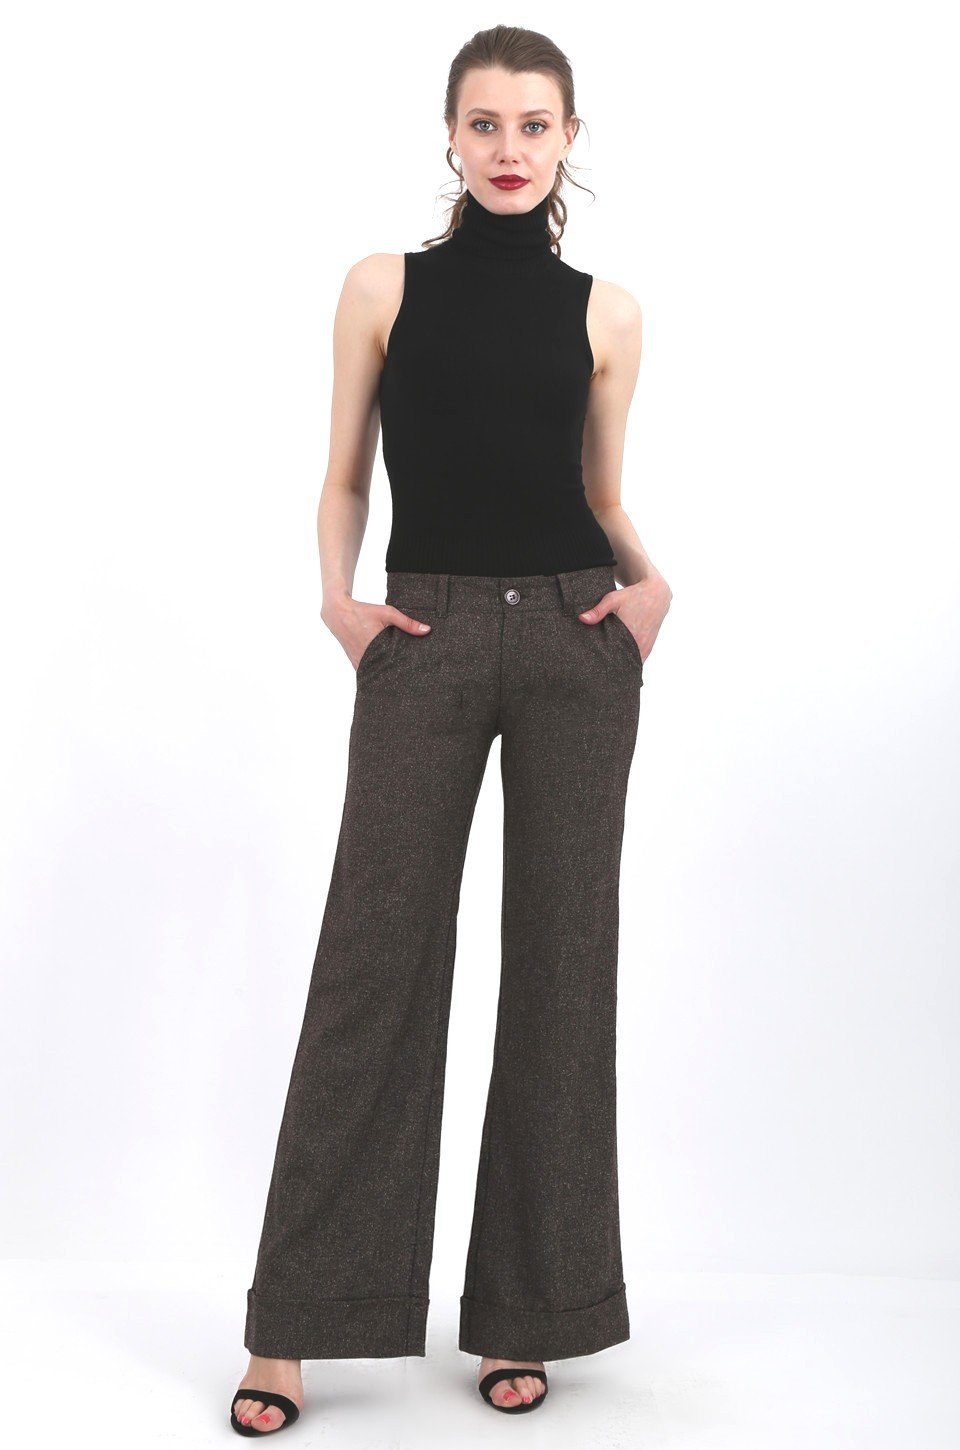 MISS PINKI Lena tailored vintage cuffed work pants in Brown